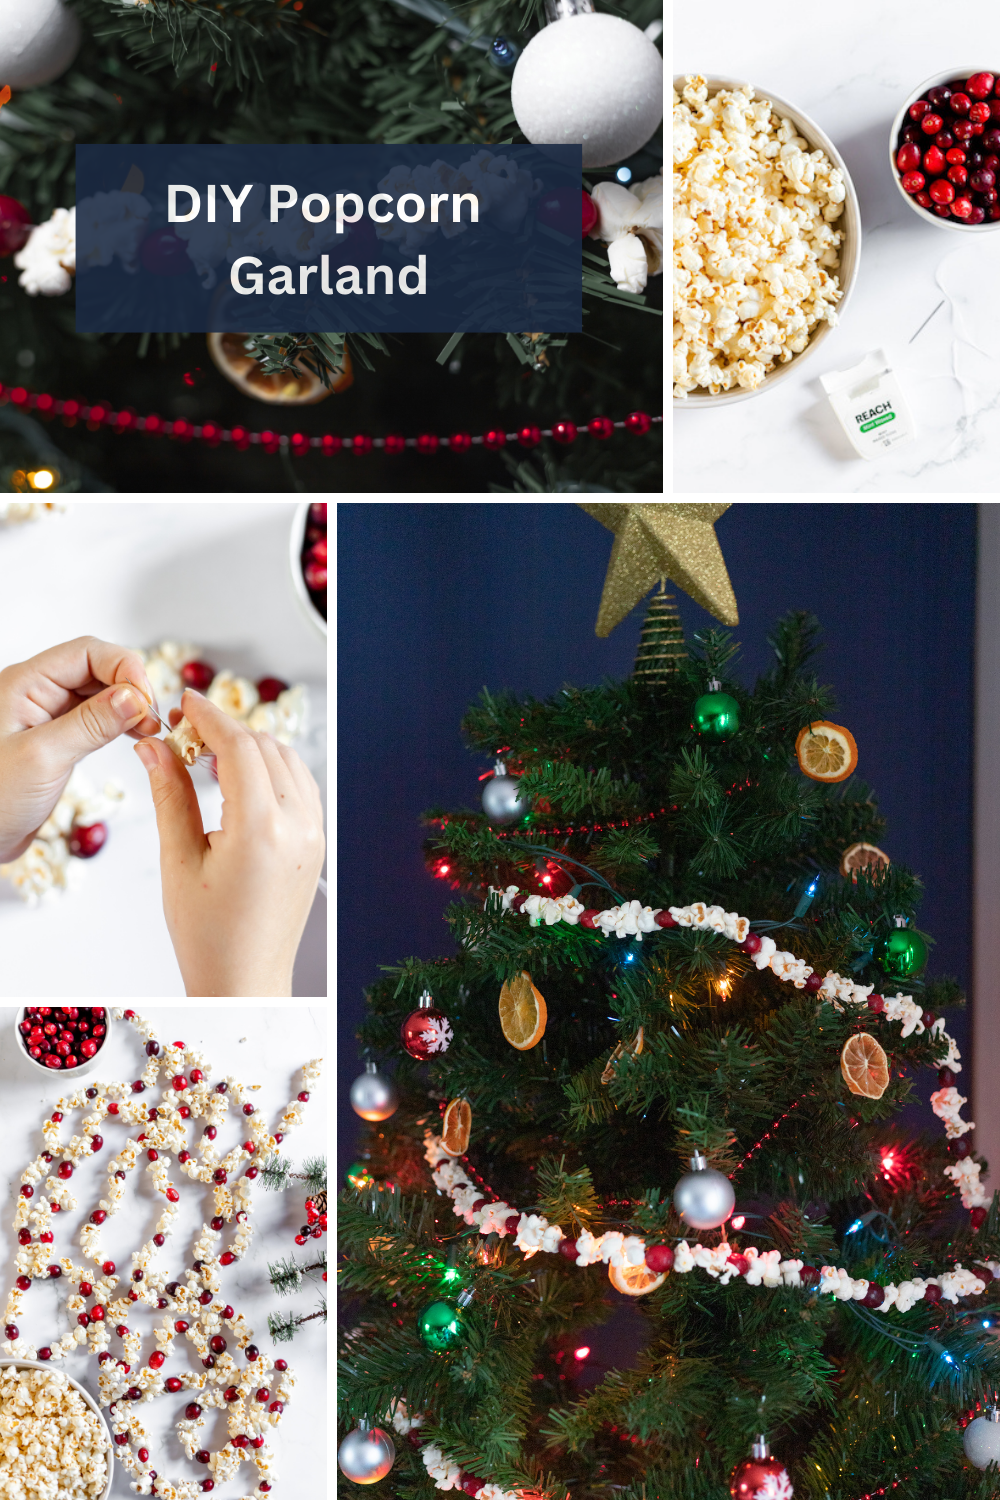 Image shows a collage of DIY popcorn garland, with images of garland on the tree, a bowl of popcorn and cranberries, hands assembling the garland.